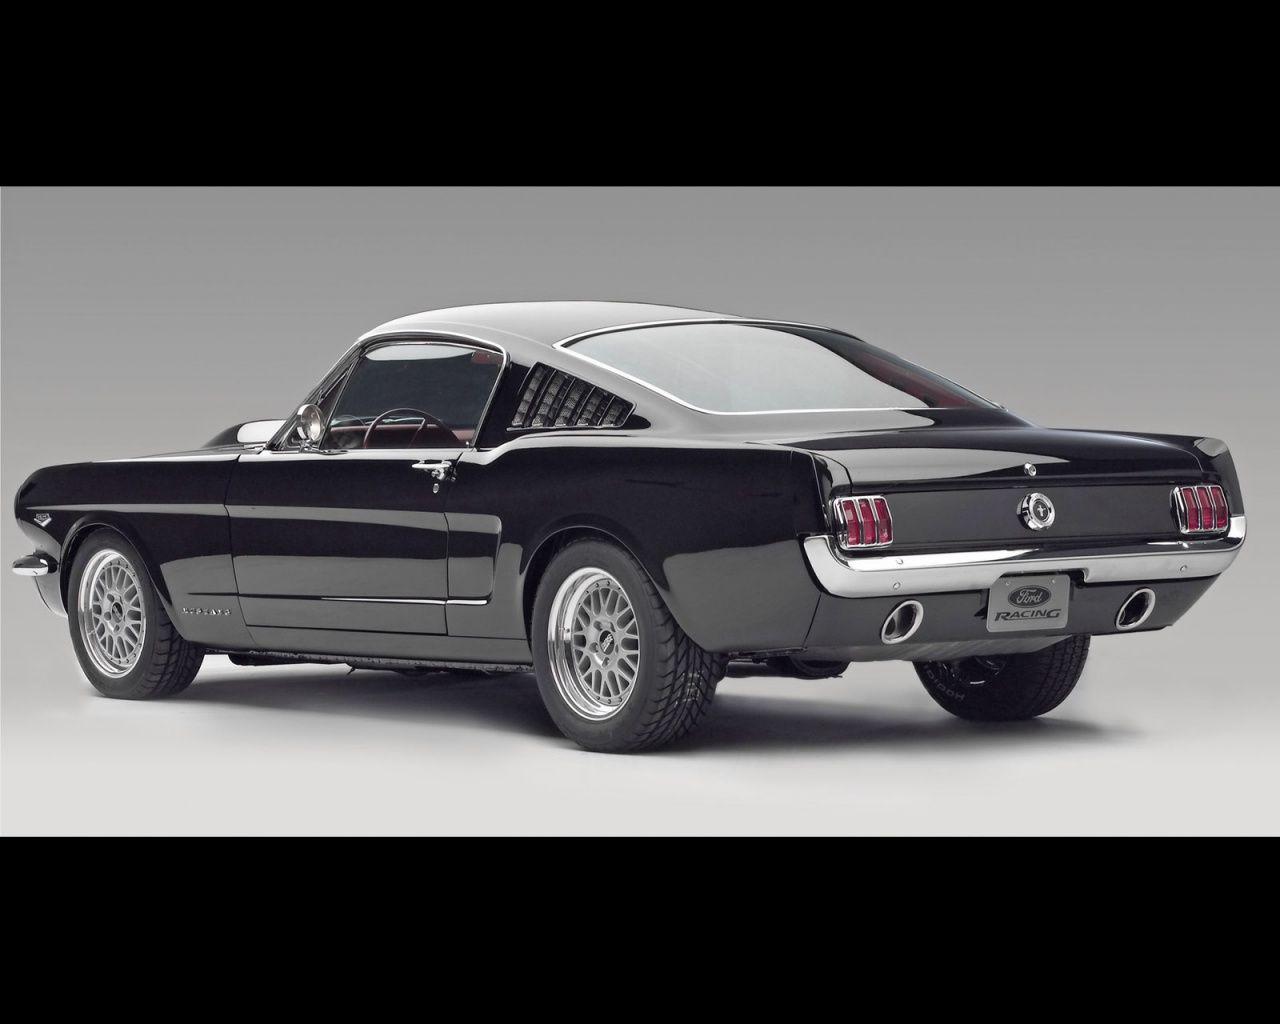 Ford Mustang Fastback Cammer Wallpaper. Ford Mustang, Ford